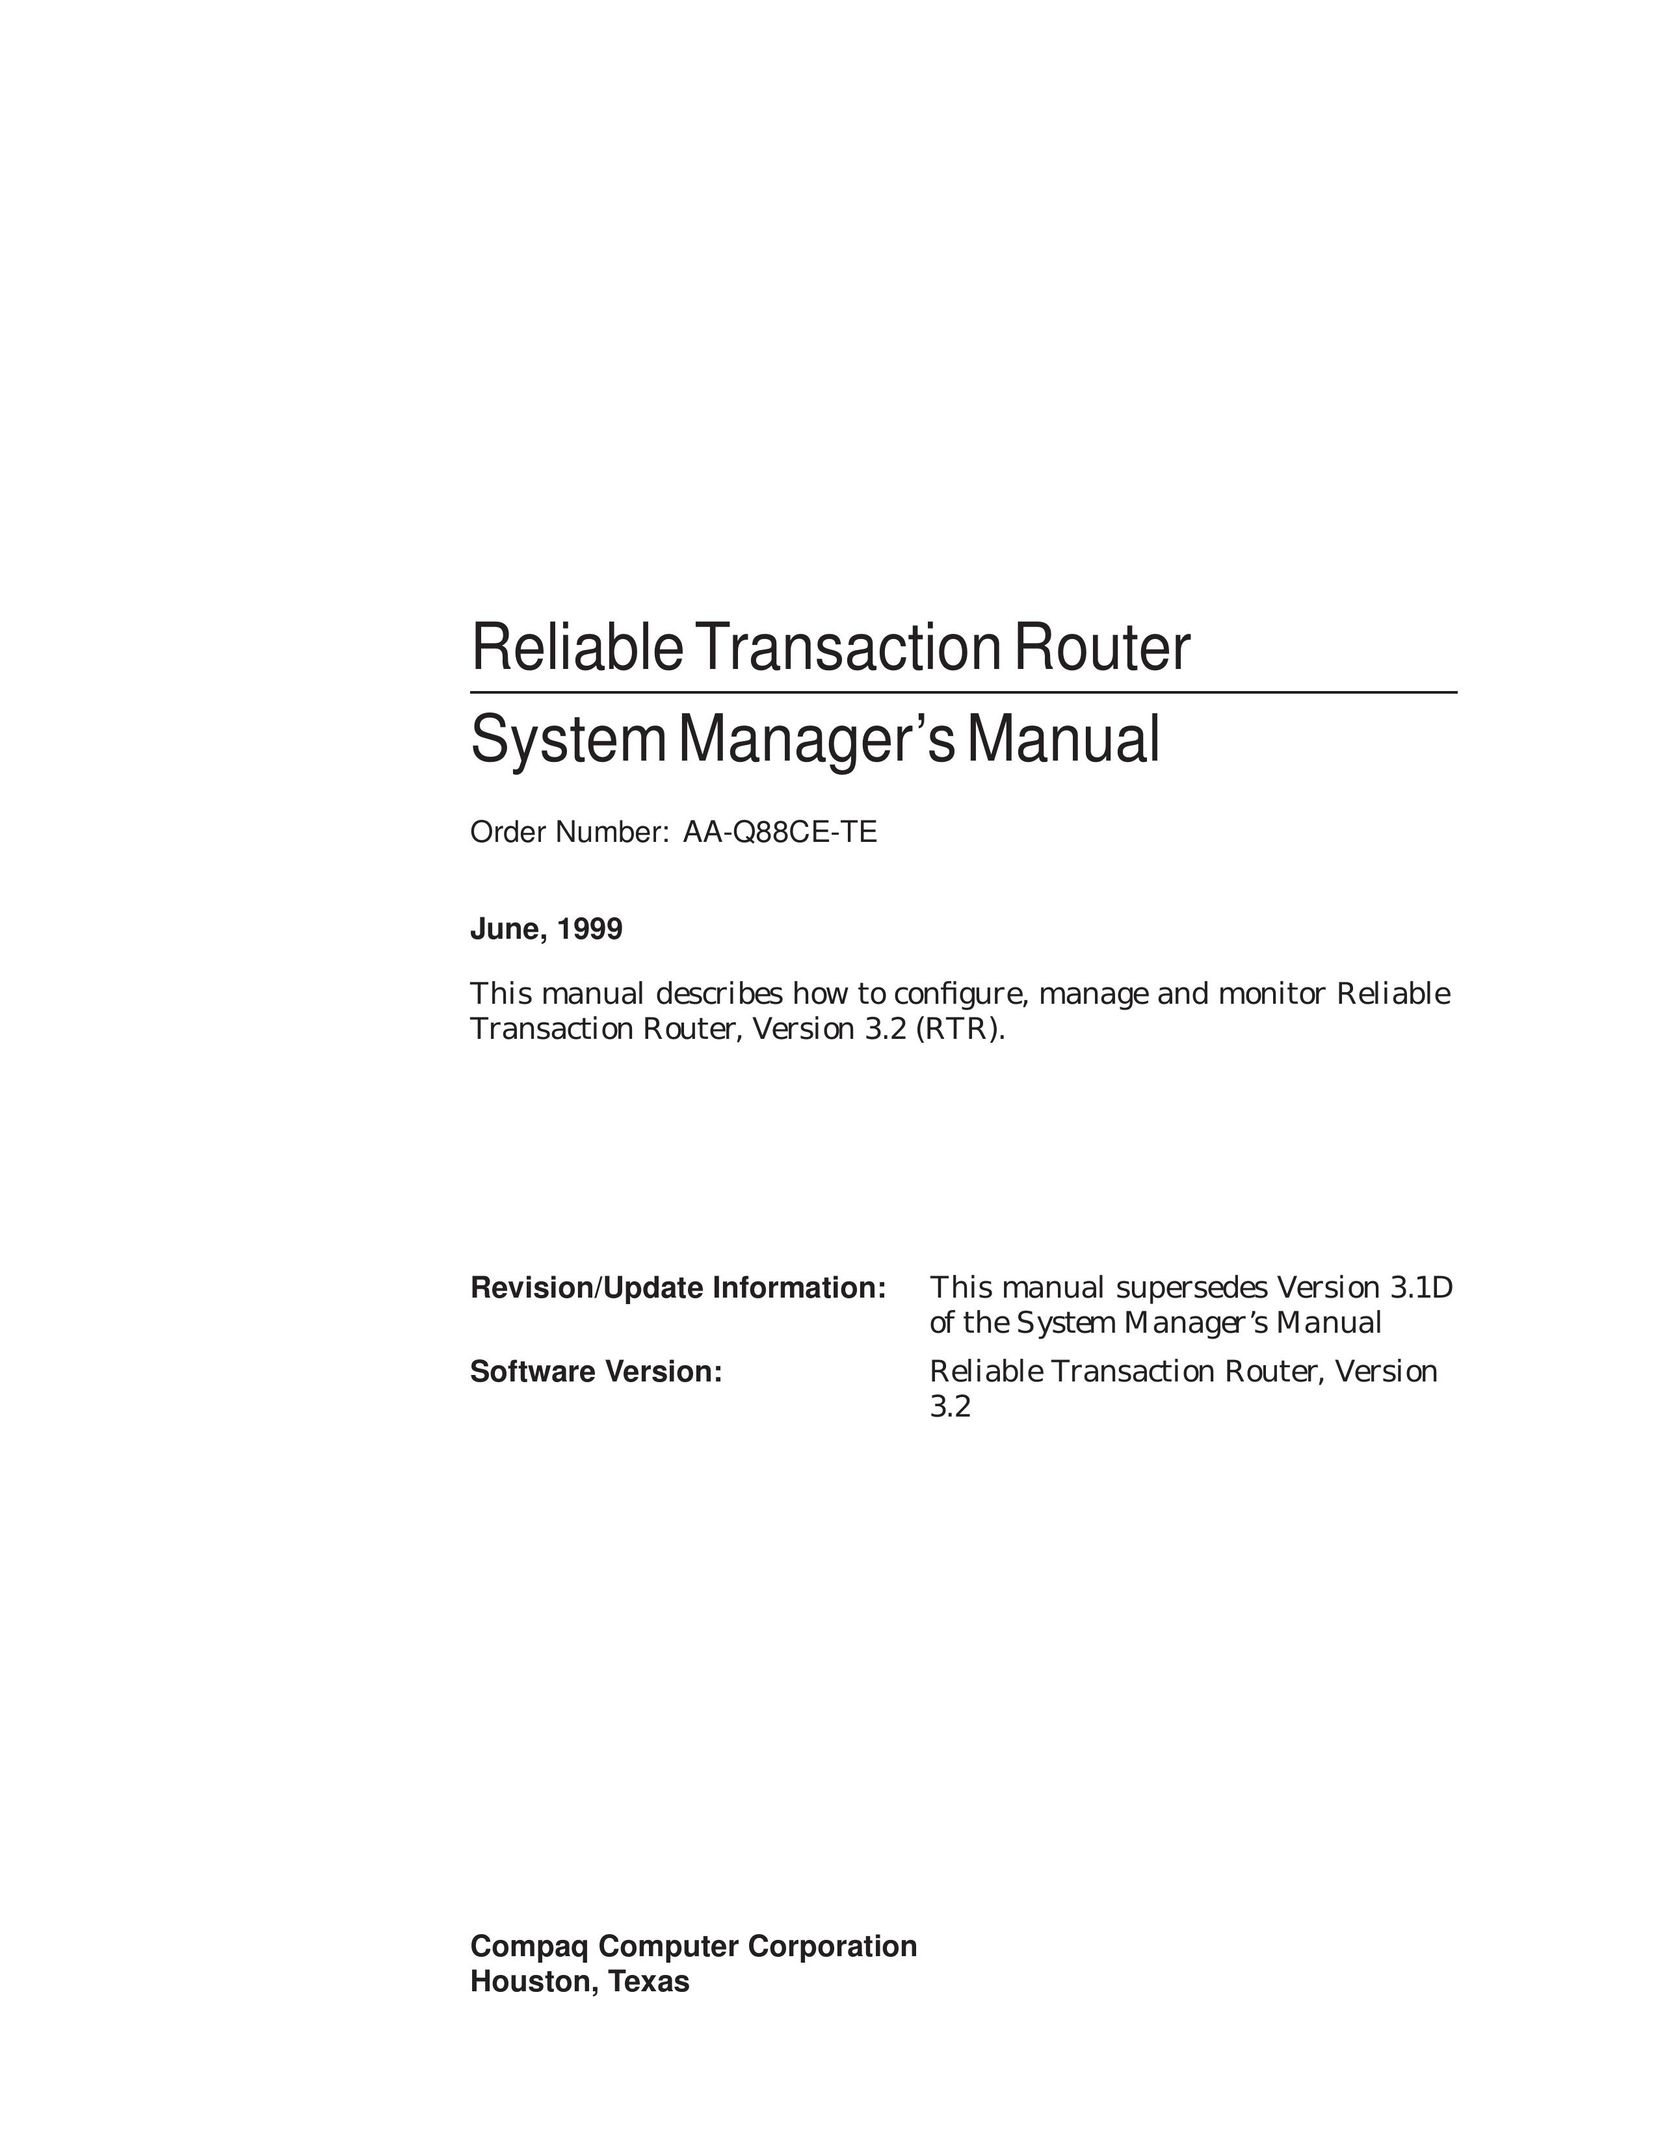 Compaq AA-Q88CE-TE Network Router User Manual